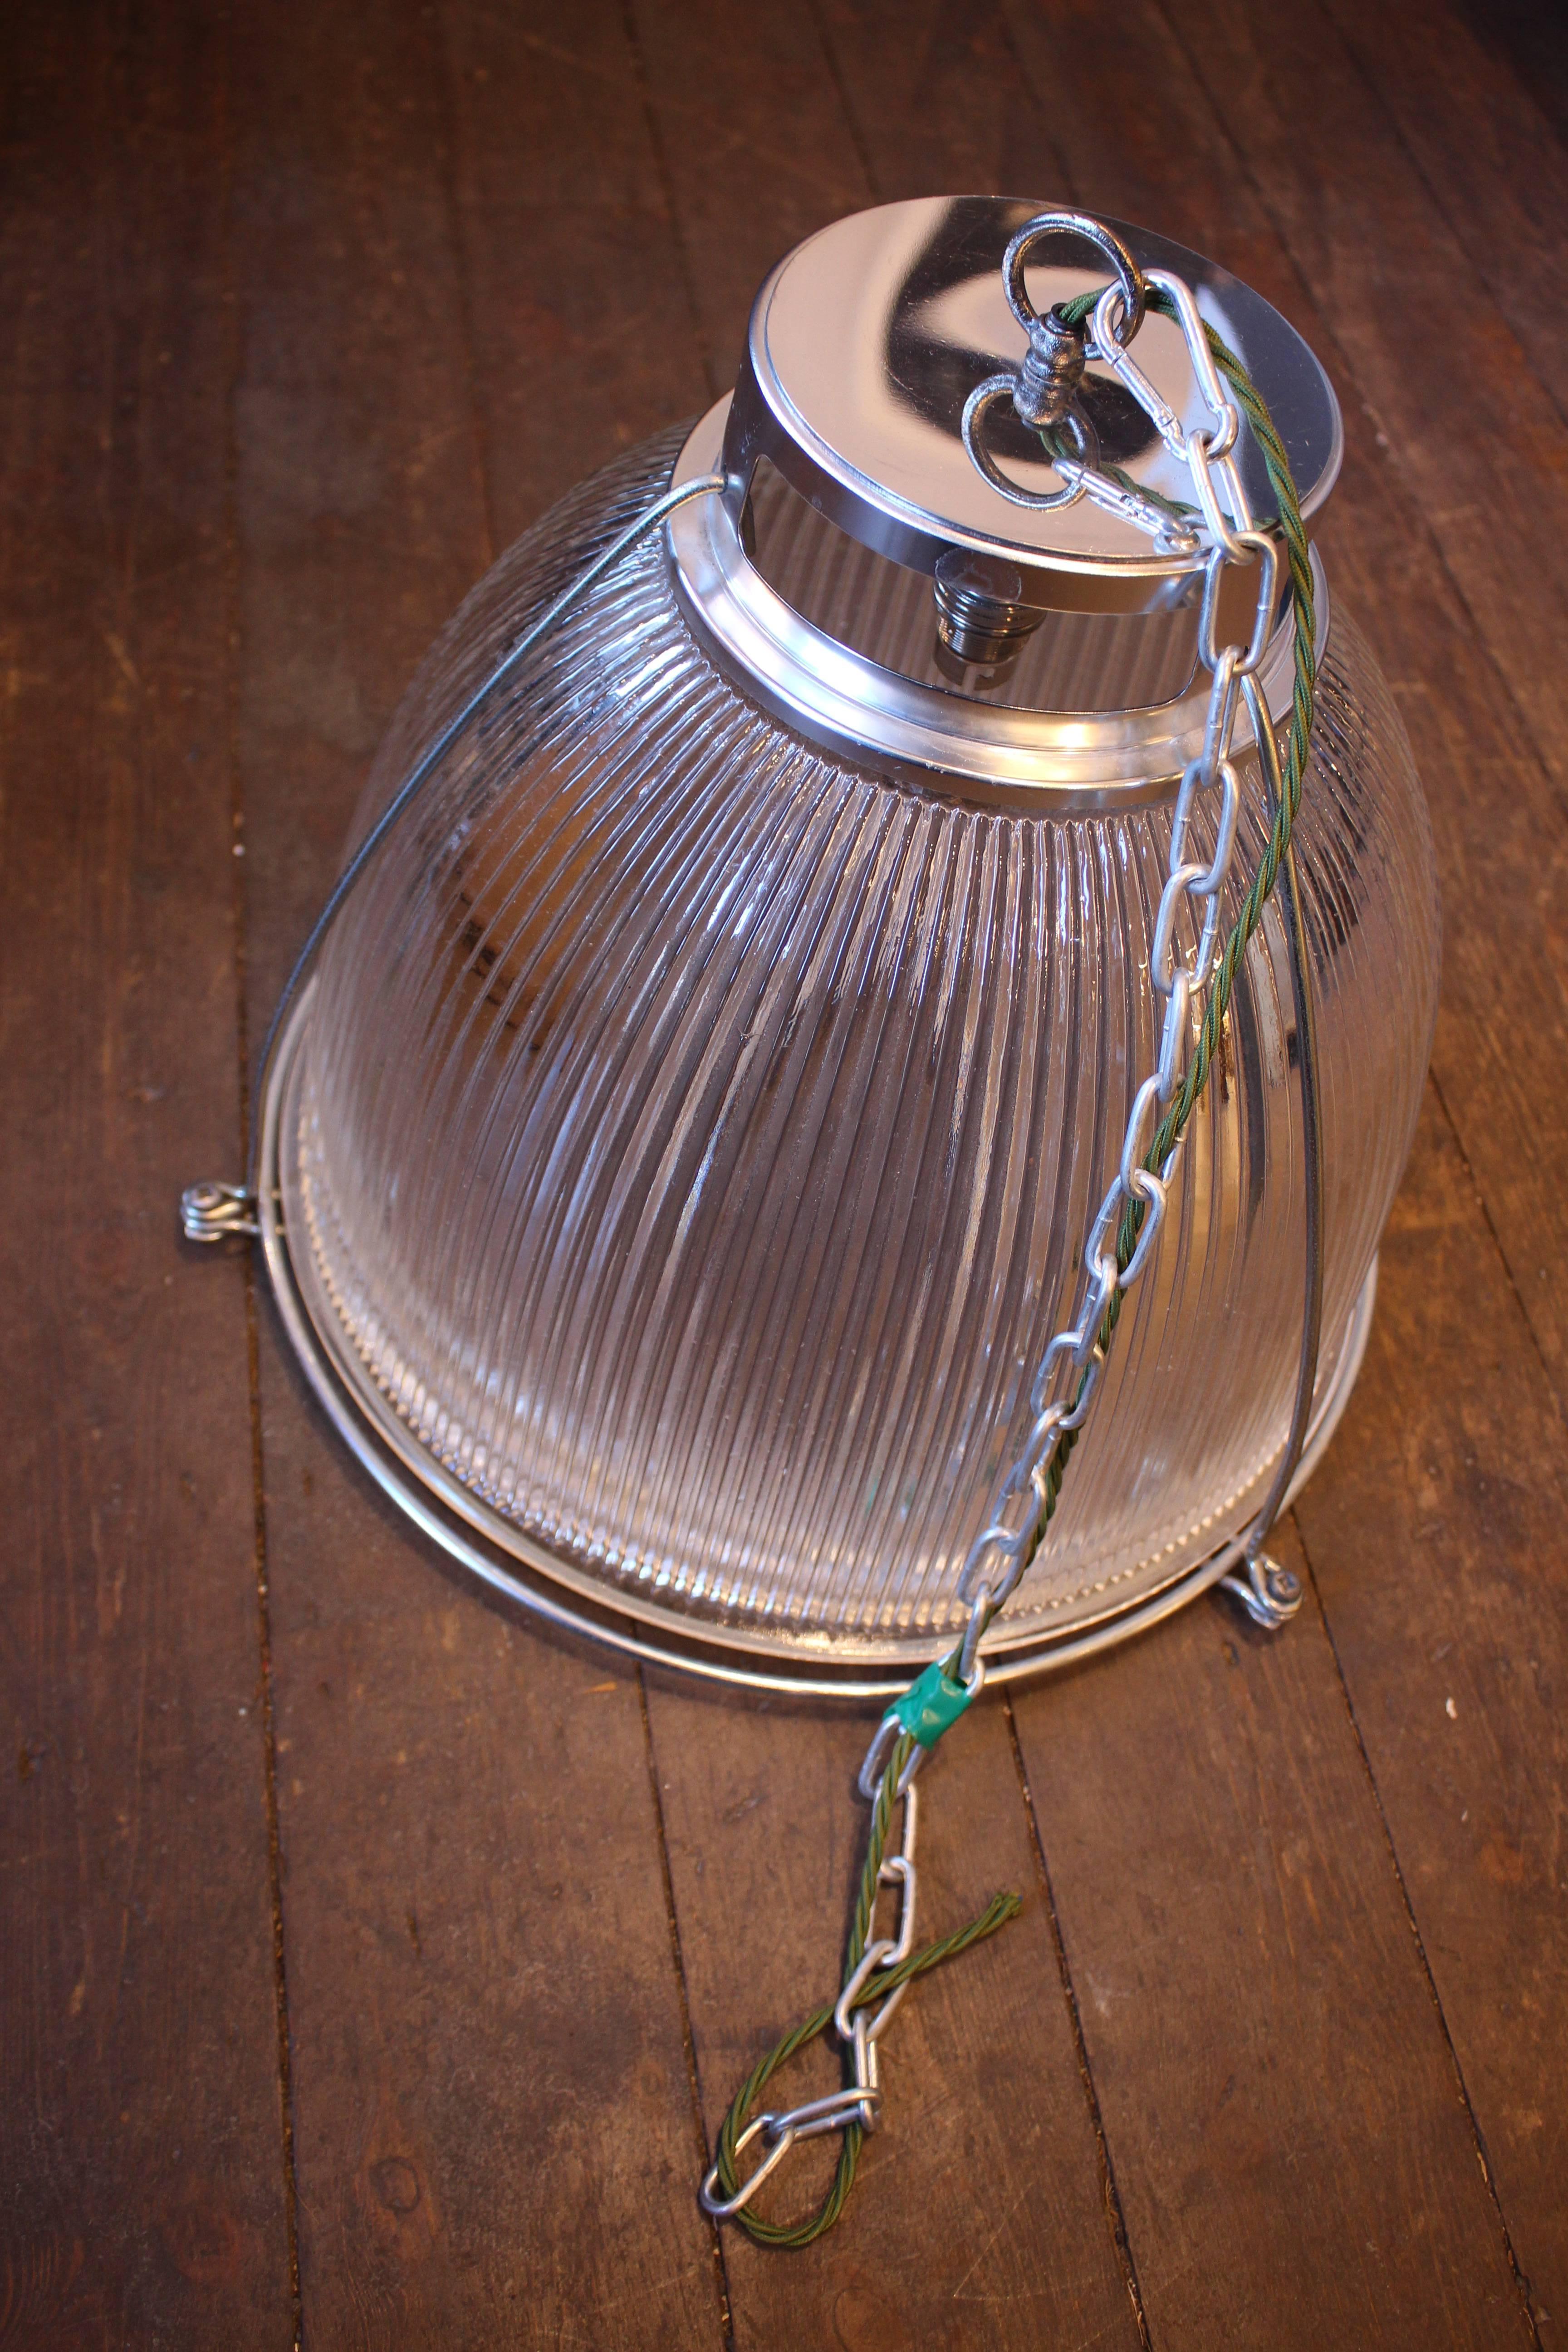 These beautiful vintage commercial grade Holophane ceiling lights are a design Classic. Reclaimed from a factory, re-polished and rewired we have around 50-60 left. Measures: 41 cm diameter with a 36 cm drop with a bayonet cap bulb fitment BC or